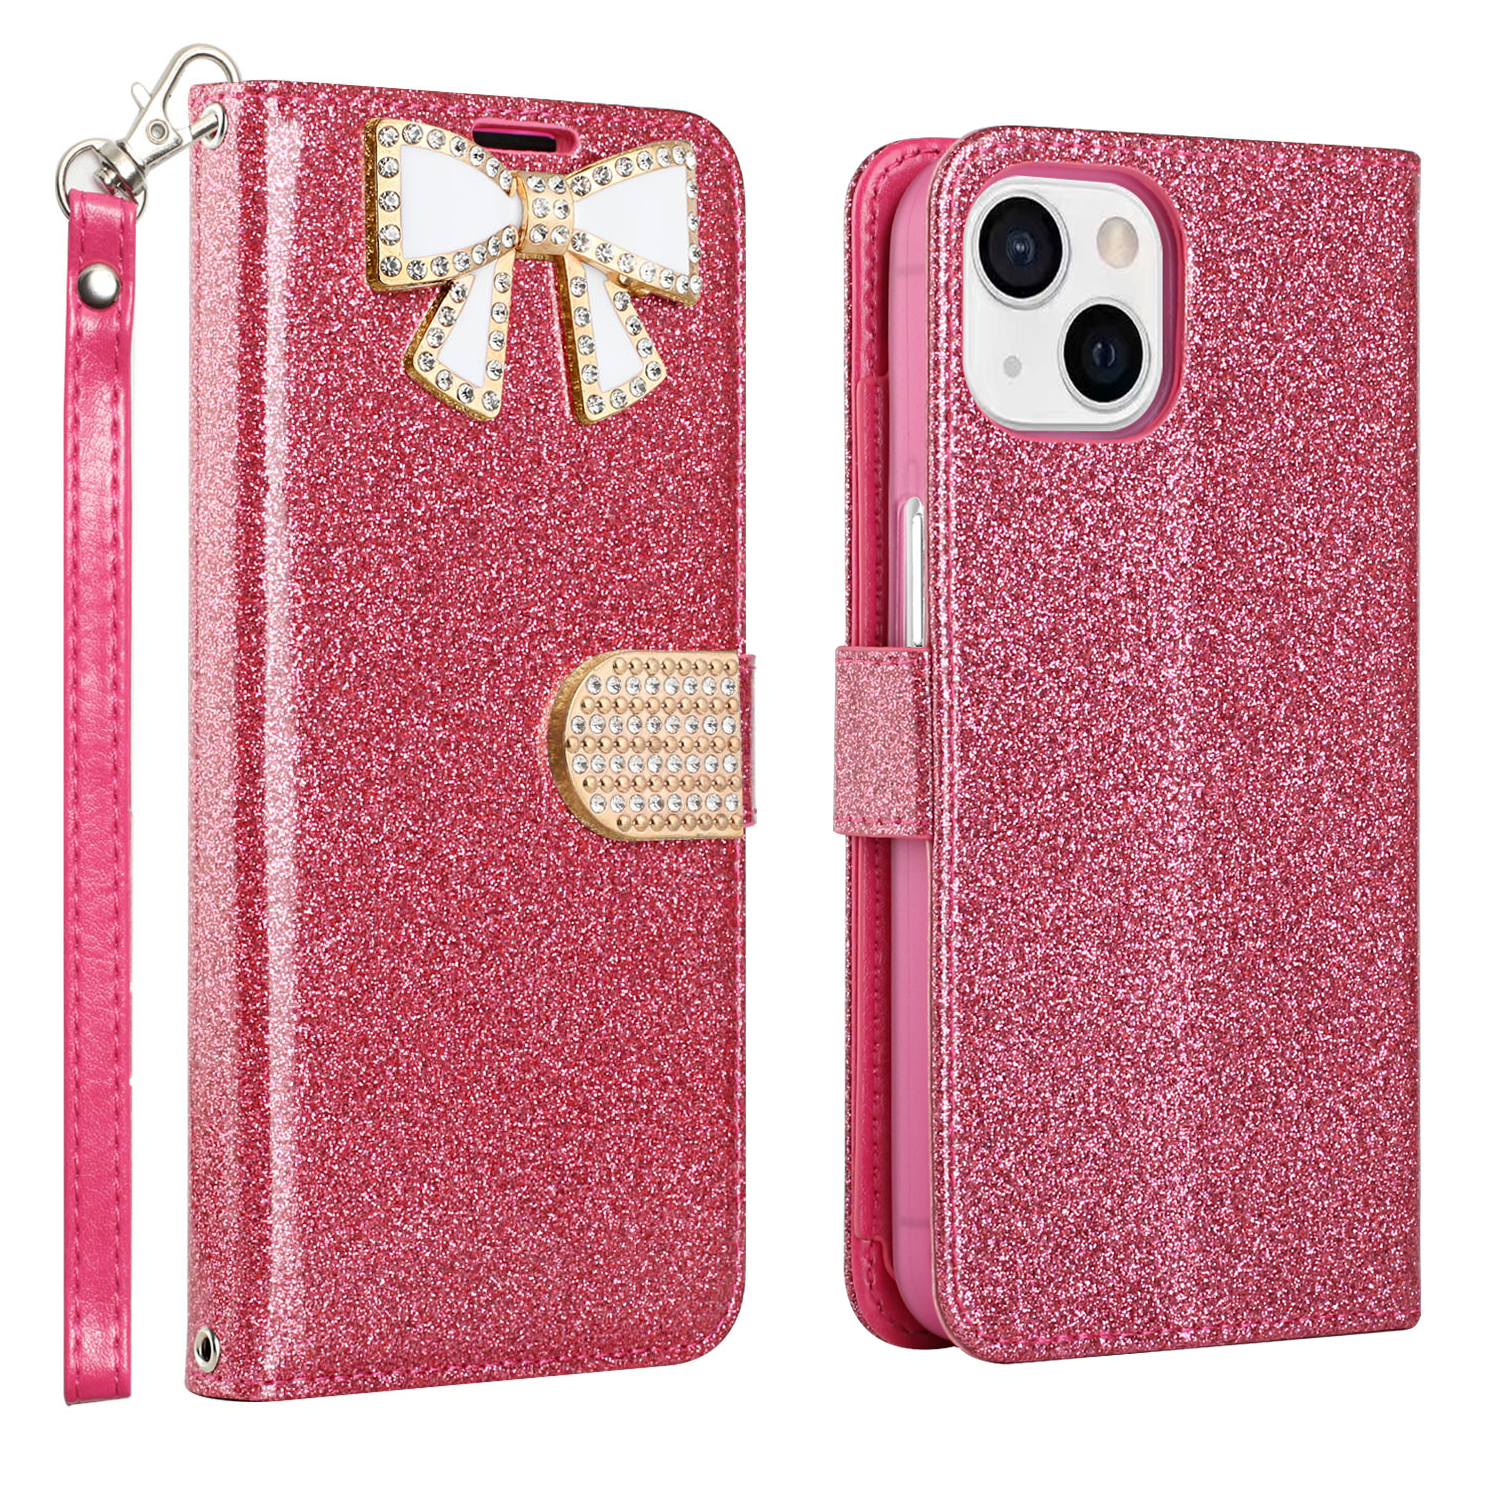 Ribbon Bow Crystal Diamond Flip BOOK Wallet Case for Apple iPhone 13 [6.1] (Hot Pink)